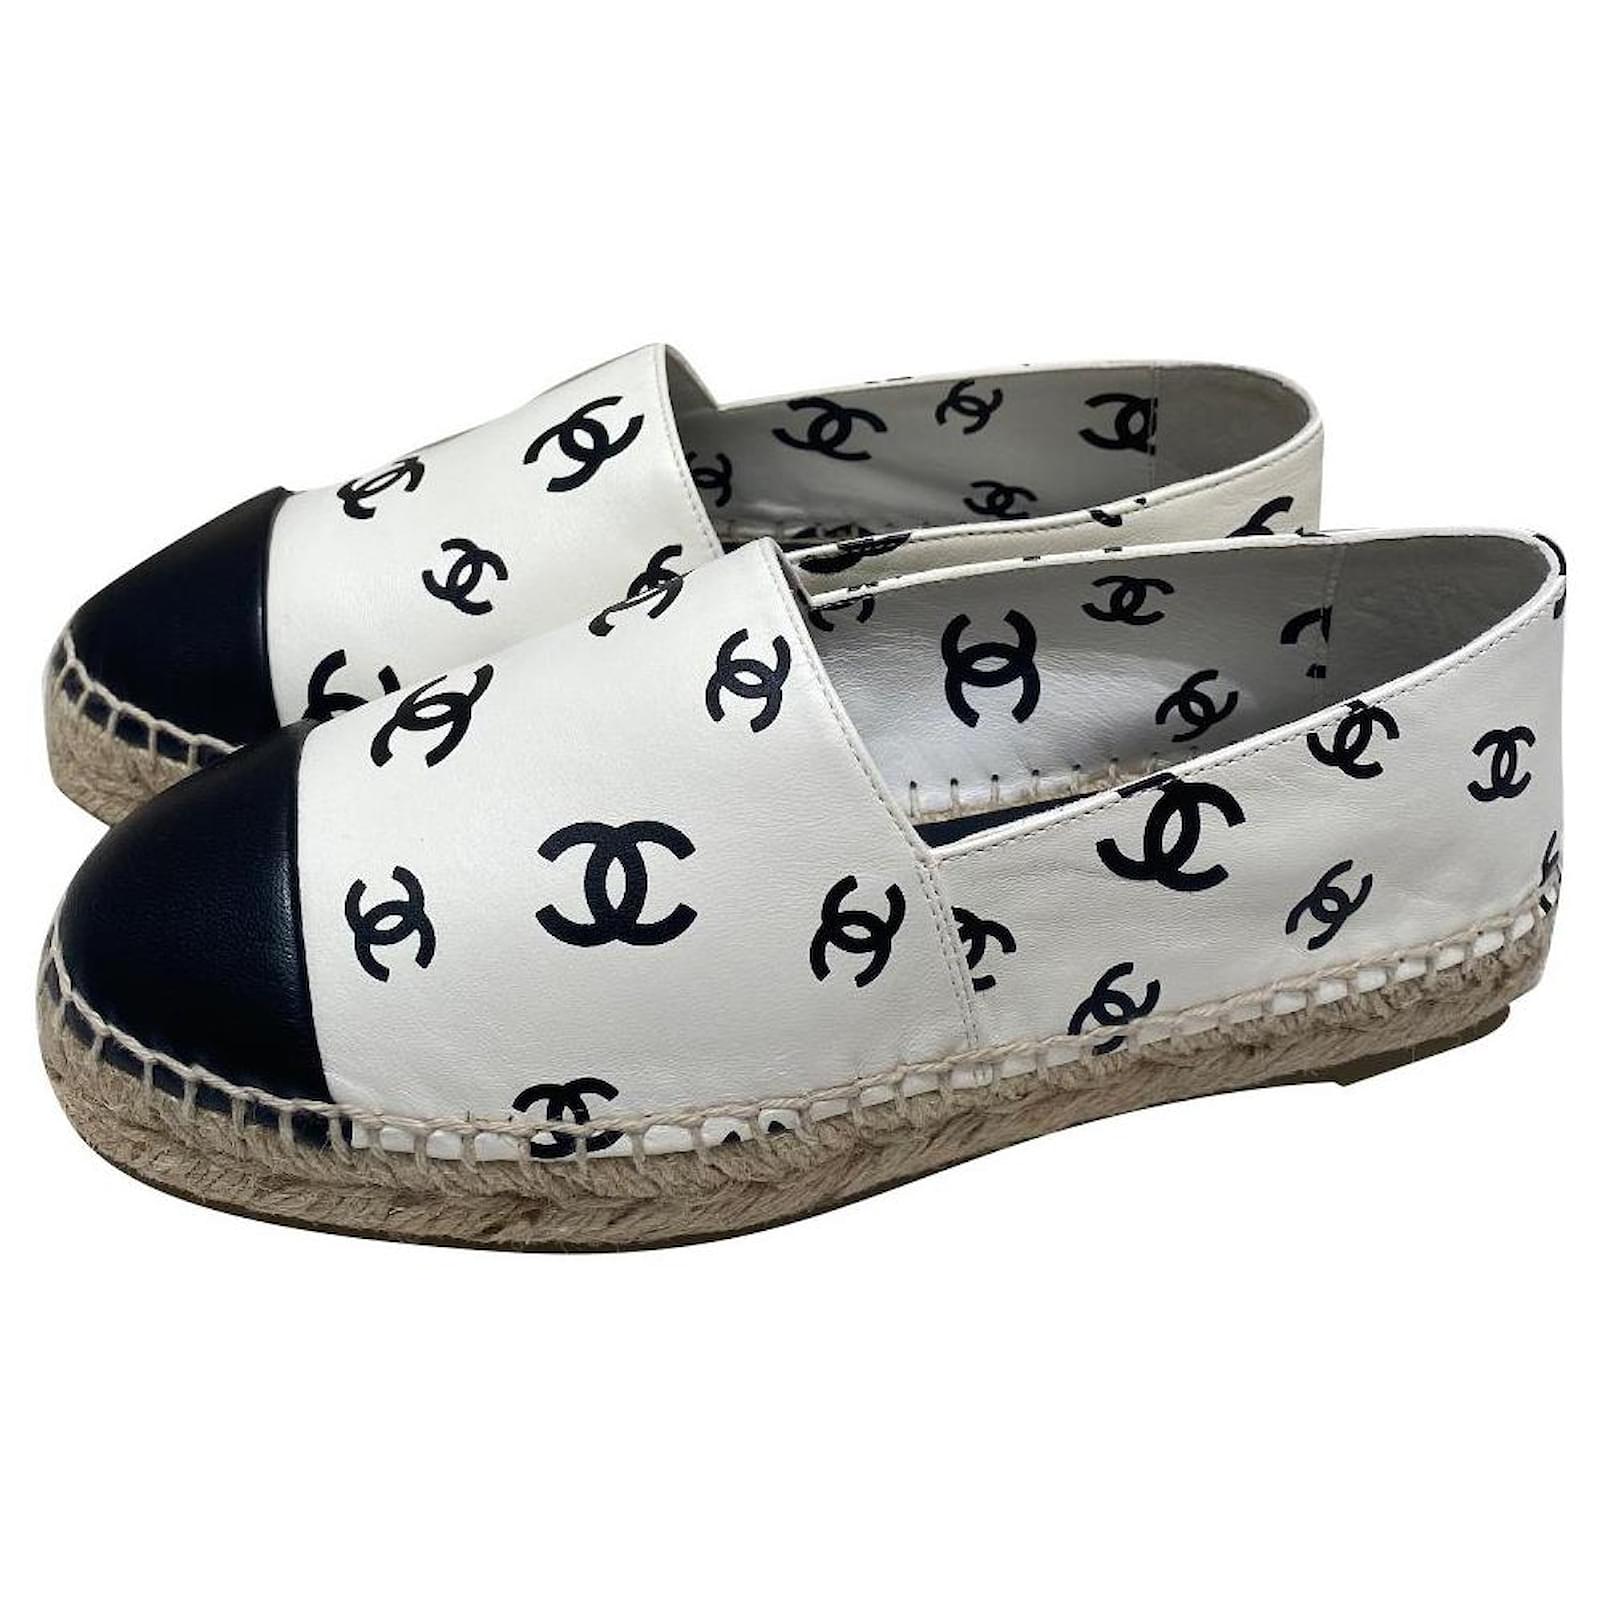 Chanel White and Black Canvas Espadrilles